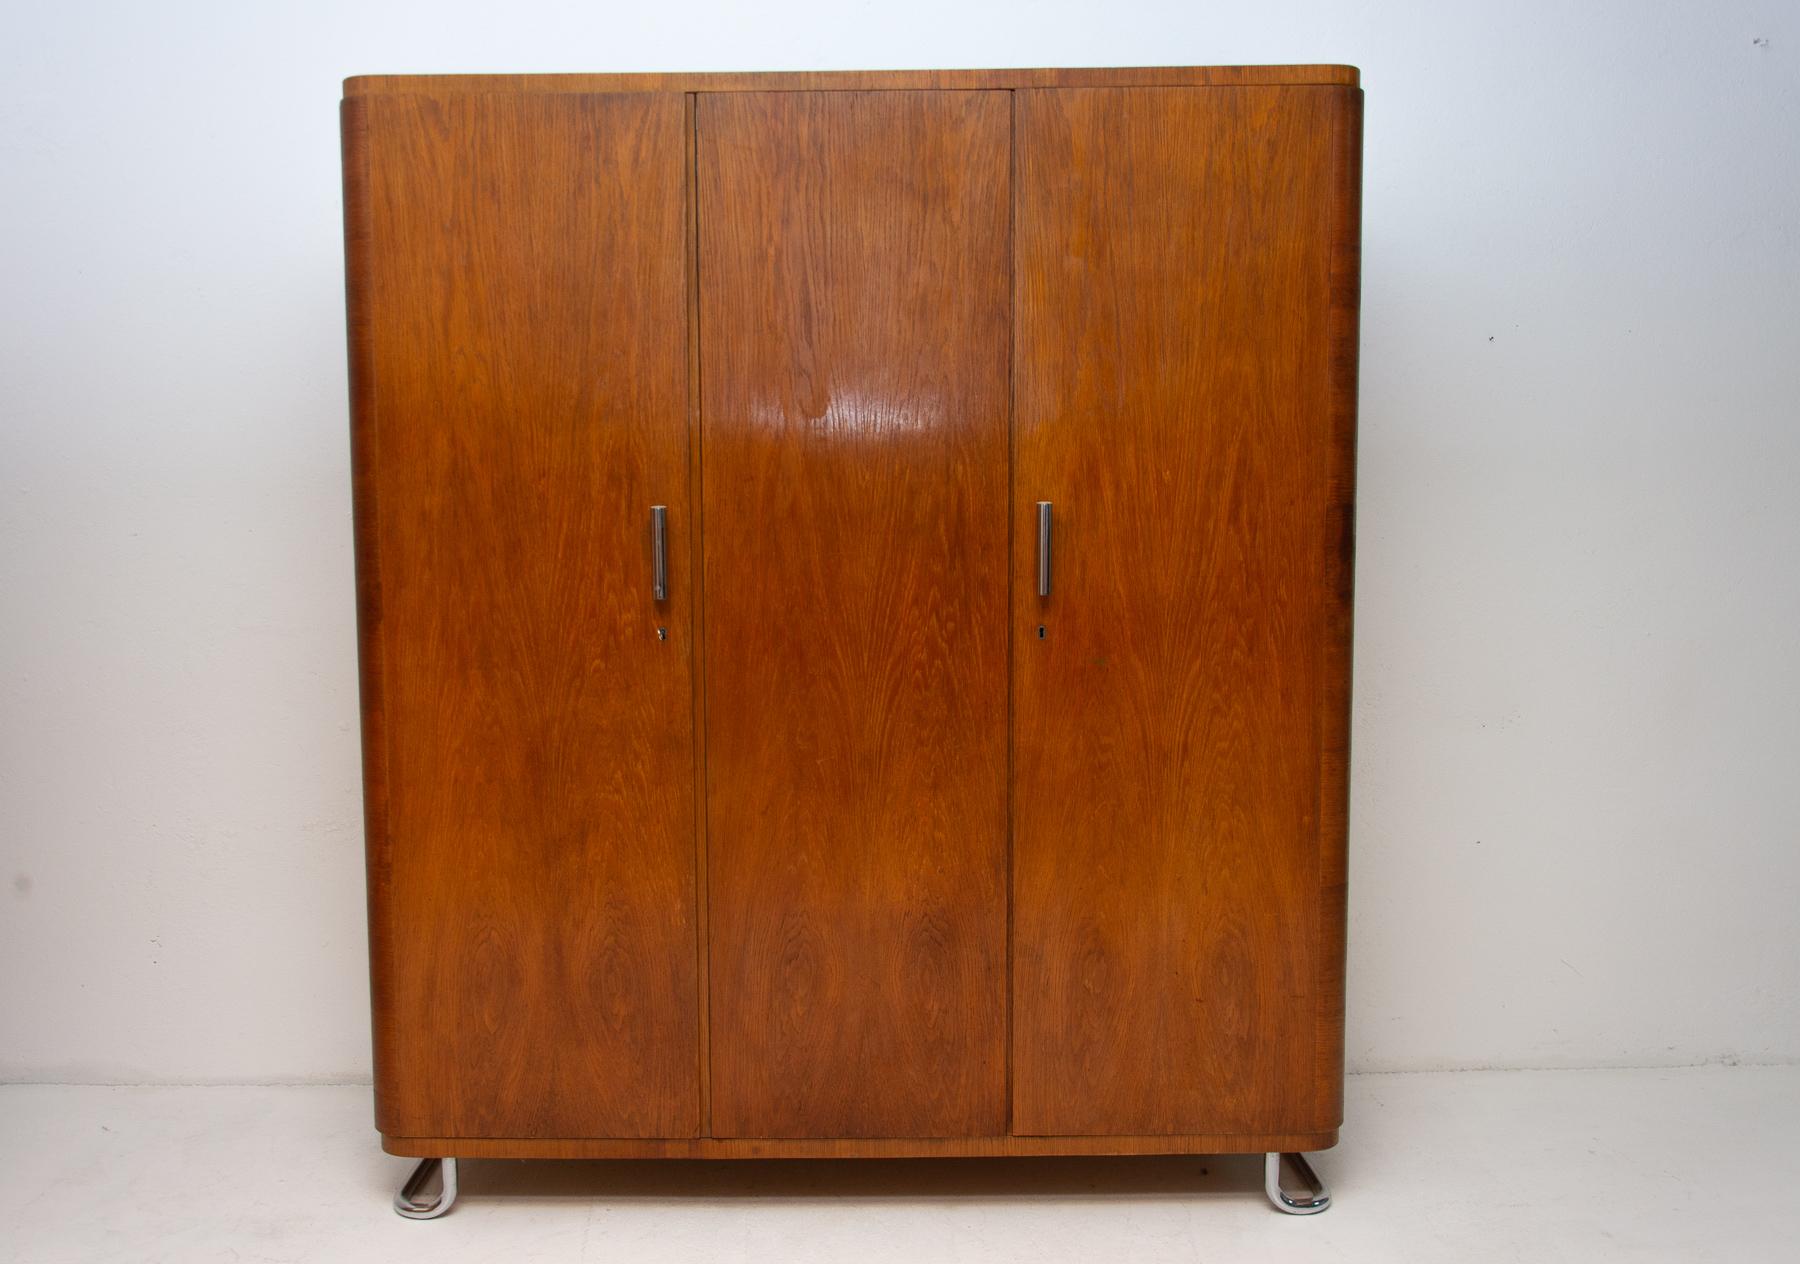 Wardrobe with chrome elements from the Bauhaus period. It was made in the former Czechoslovakia by Vichr & spol in the 1930s.
This is a typical example of residential furniture from the Bauhaus period in Central Europe. Chrome is in very good